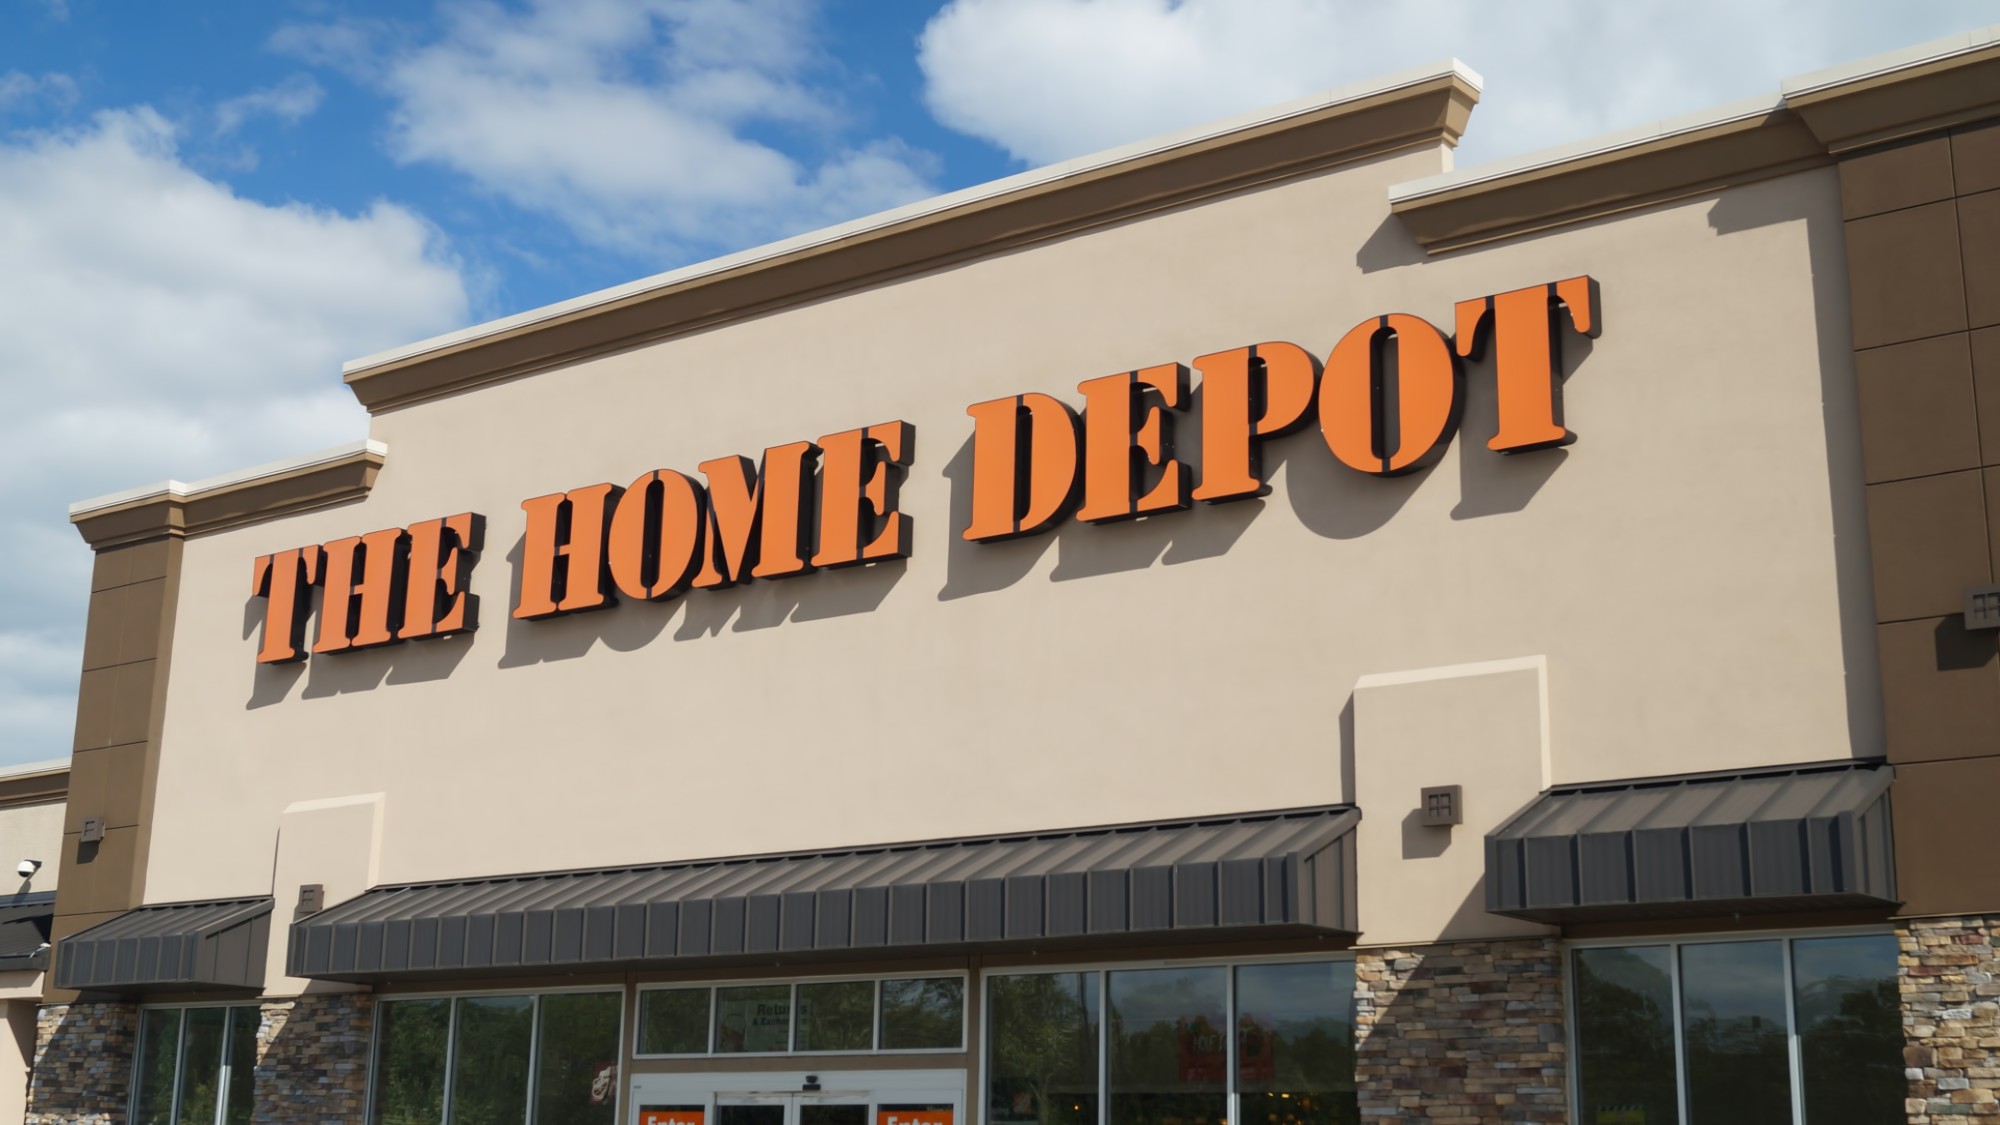 Does Home Depot Price Match Amazon In 2022? (Full Guide)